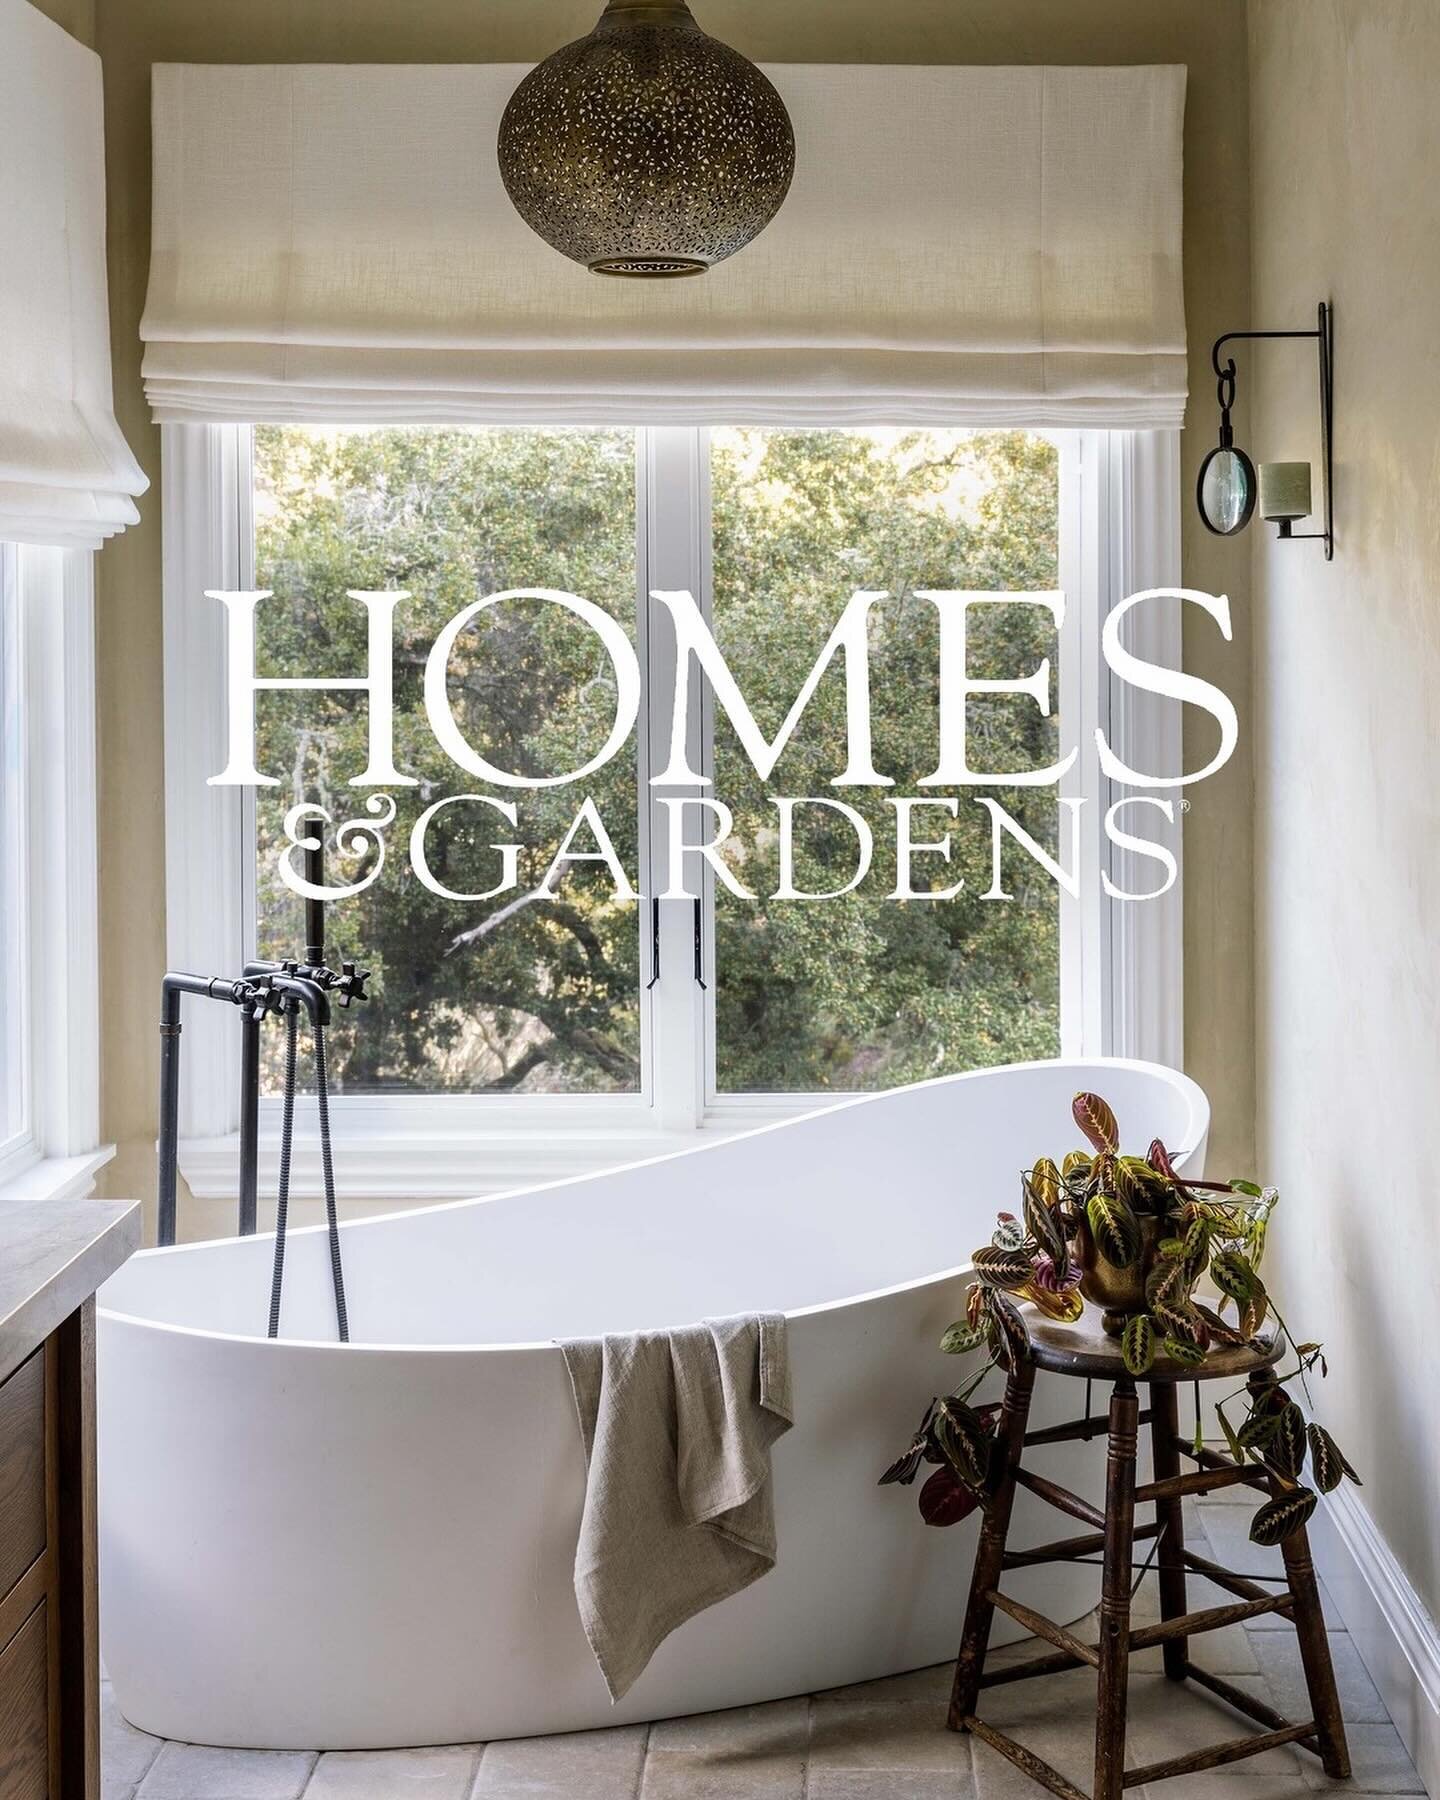 Thank you @homesandgardensofficial for including us in your recent bathrooms feature! Creating spaces that feel warm and inviting is a core part of our design philosophy, so this was an especially meaningful piece to be featured in. 

This is the pri